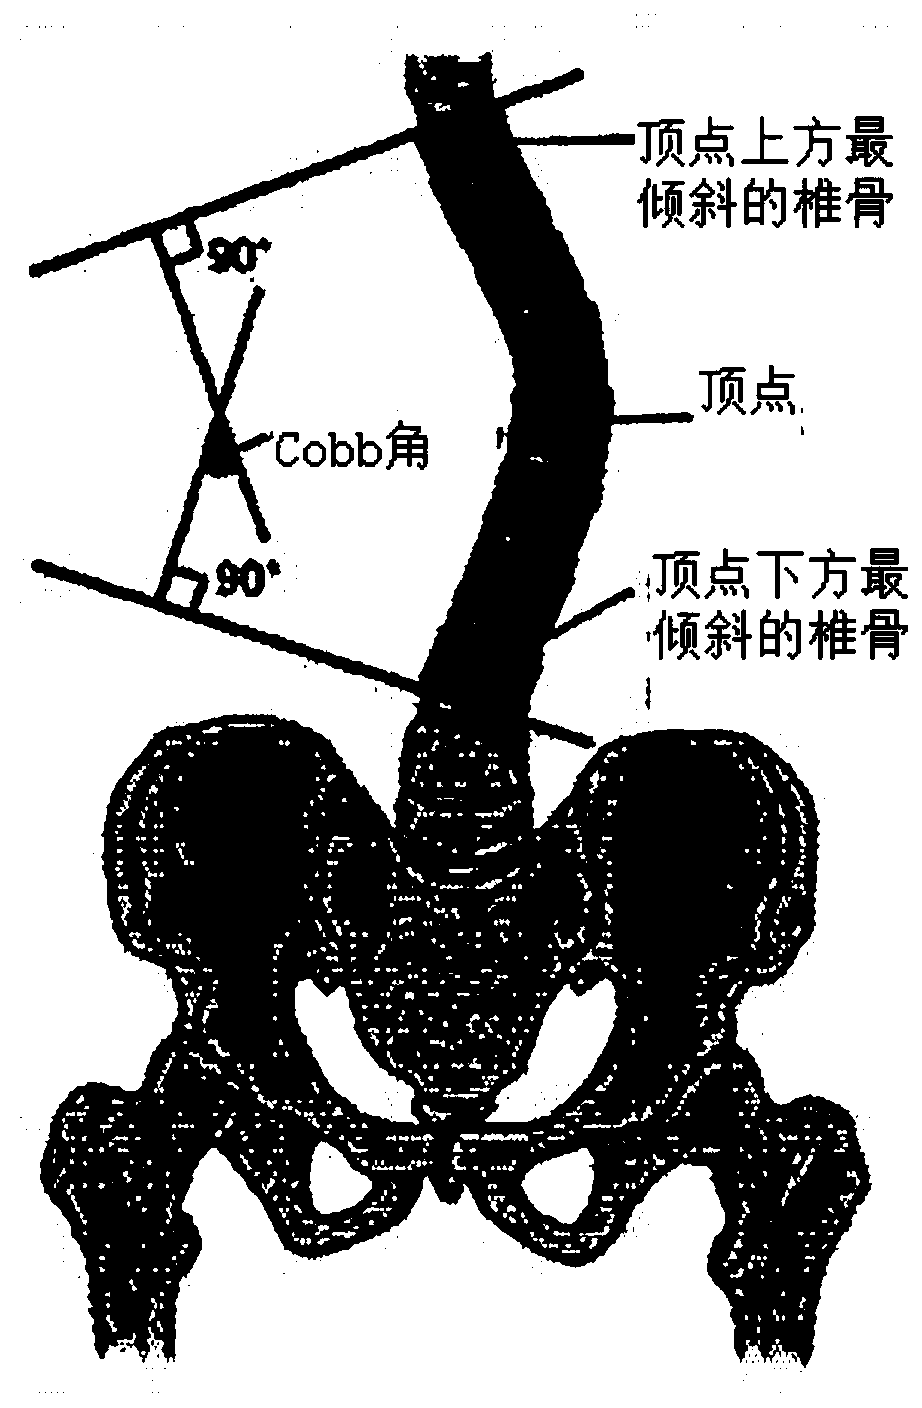 Device for examining degree of scoliosis